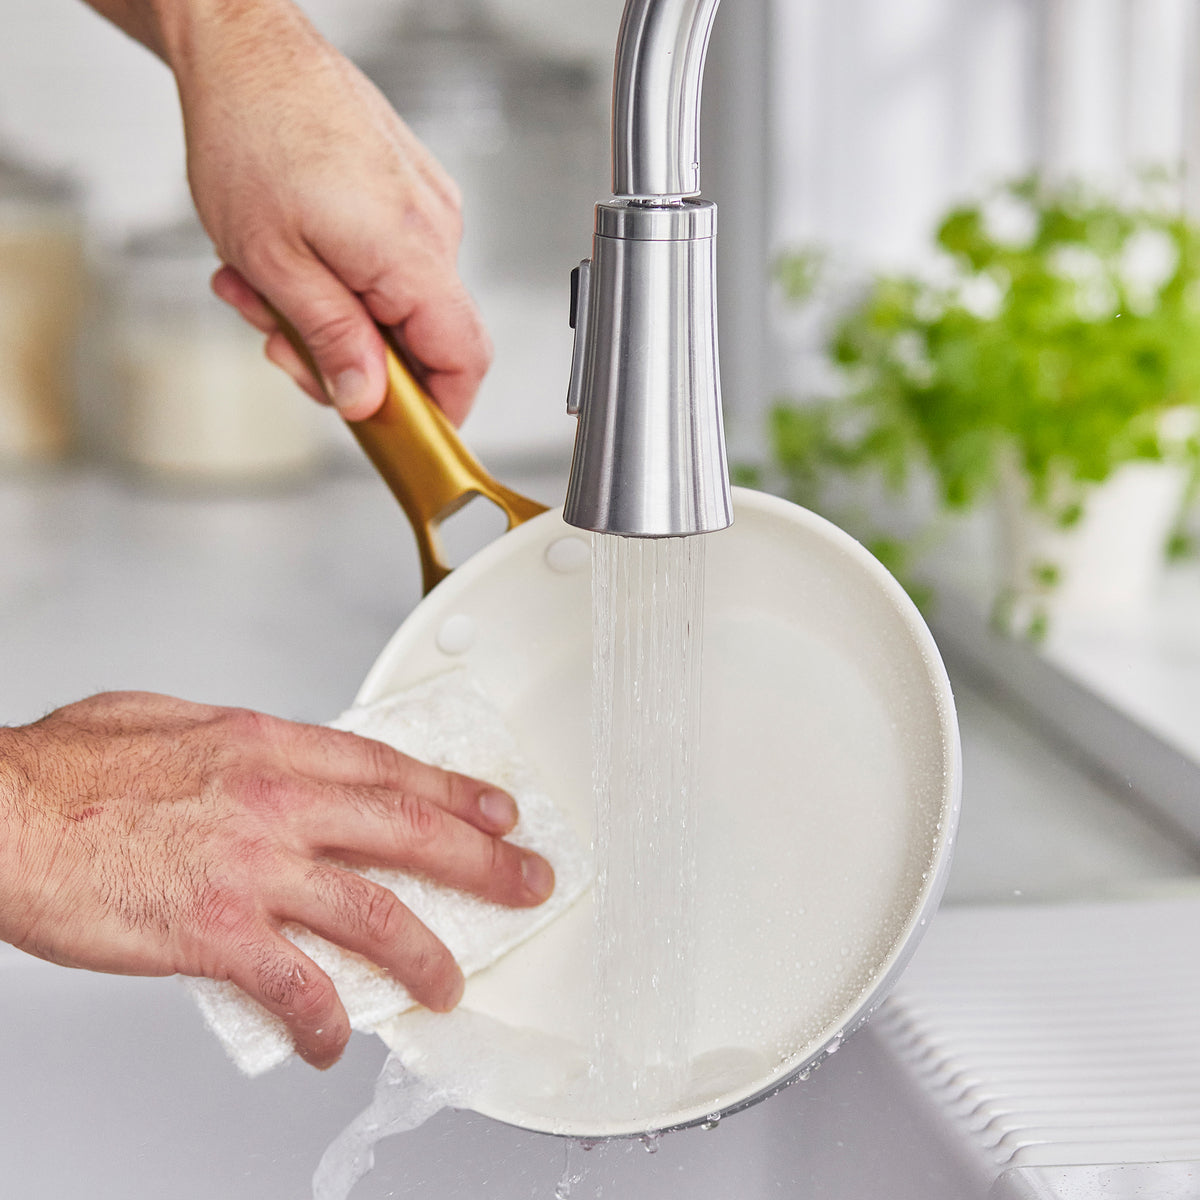 hands washing fry pan with sponge over sink.